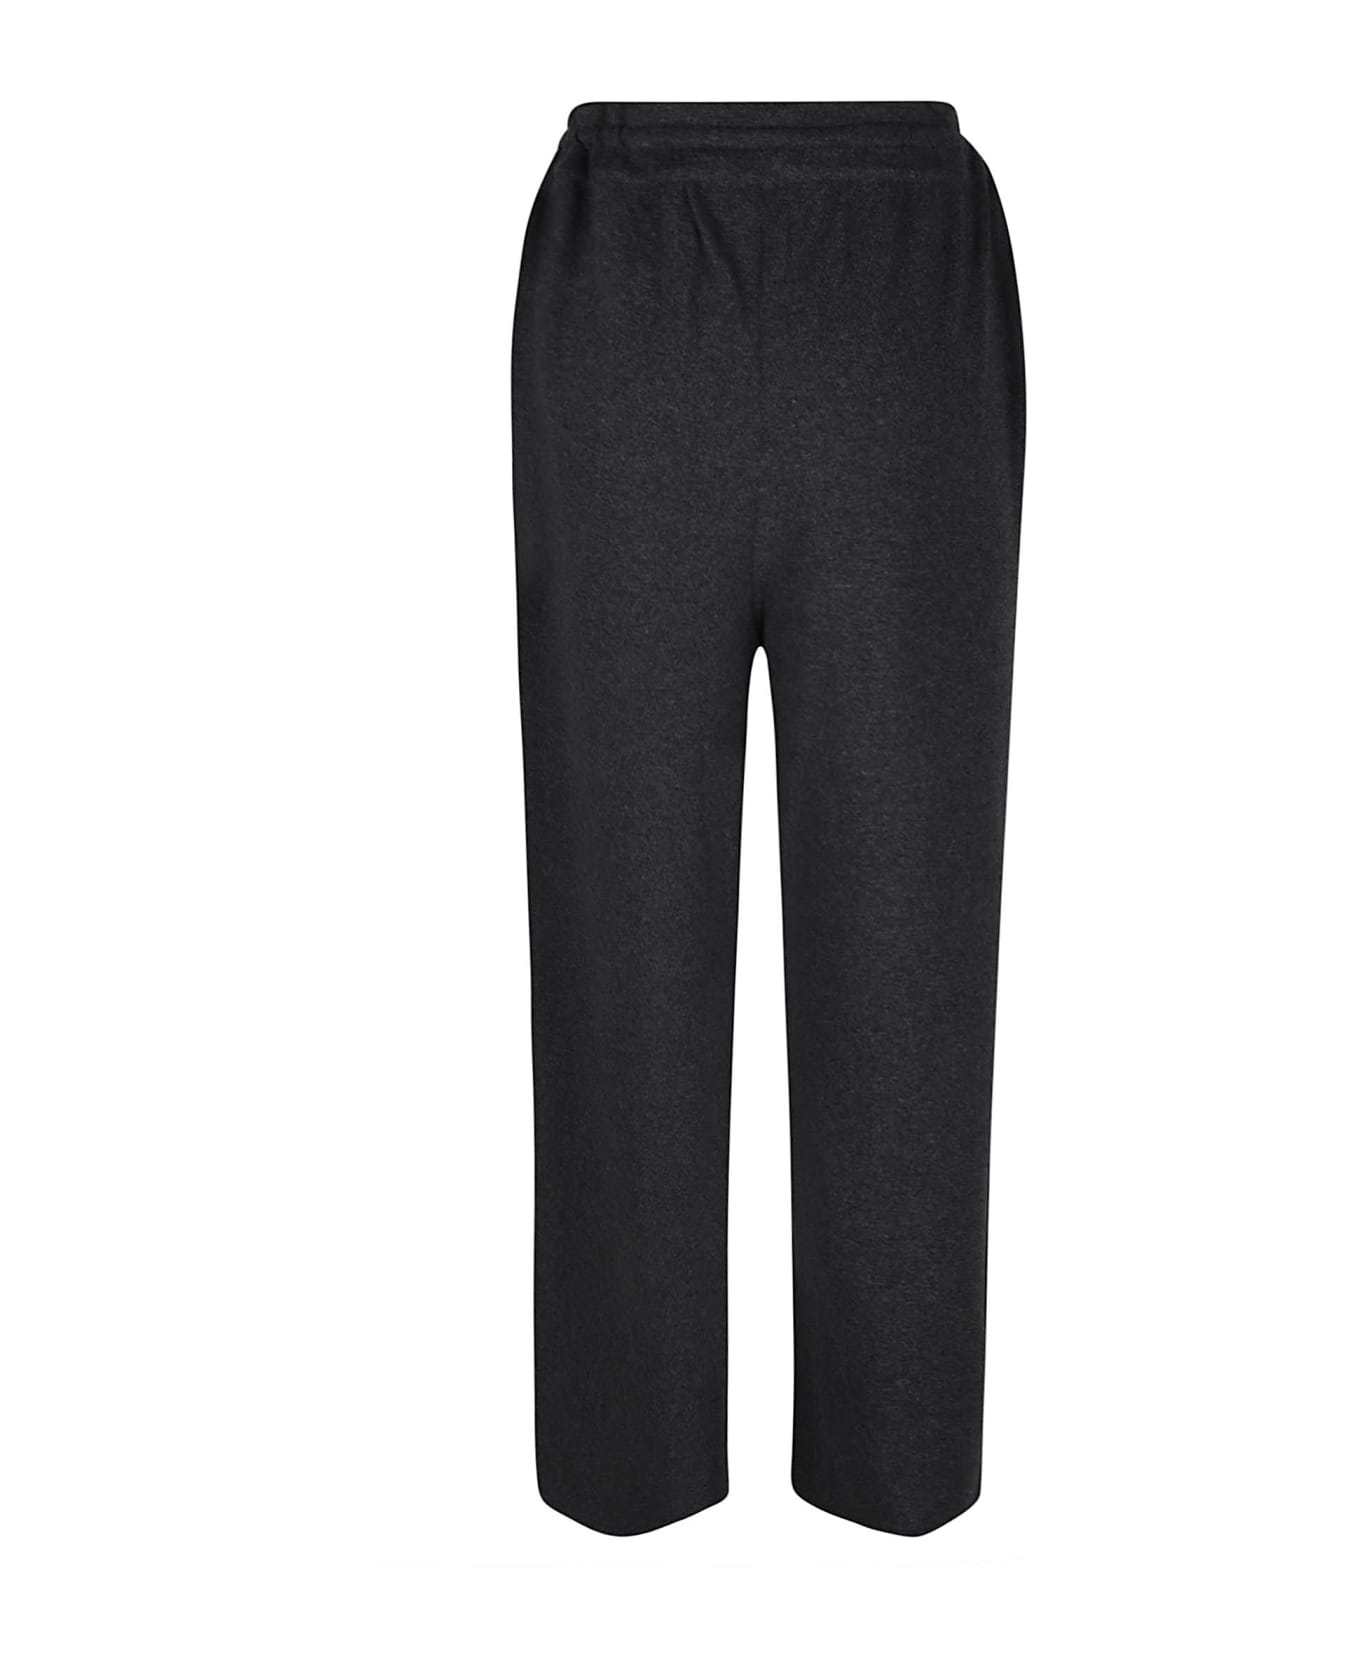 Jil Sander Laced Trousers - Antracite